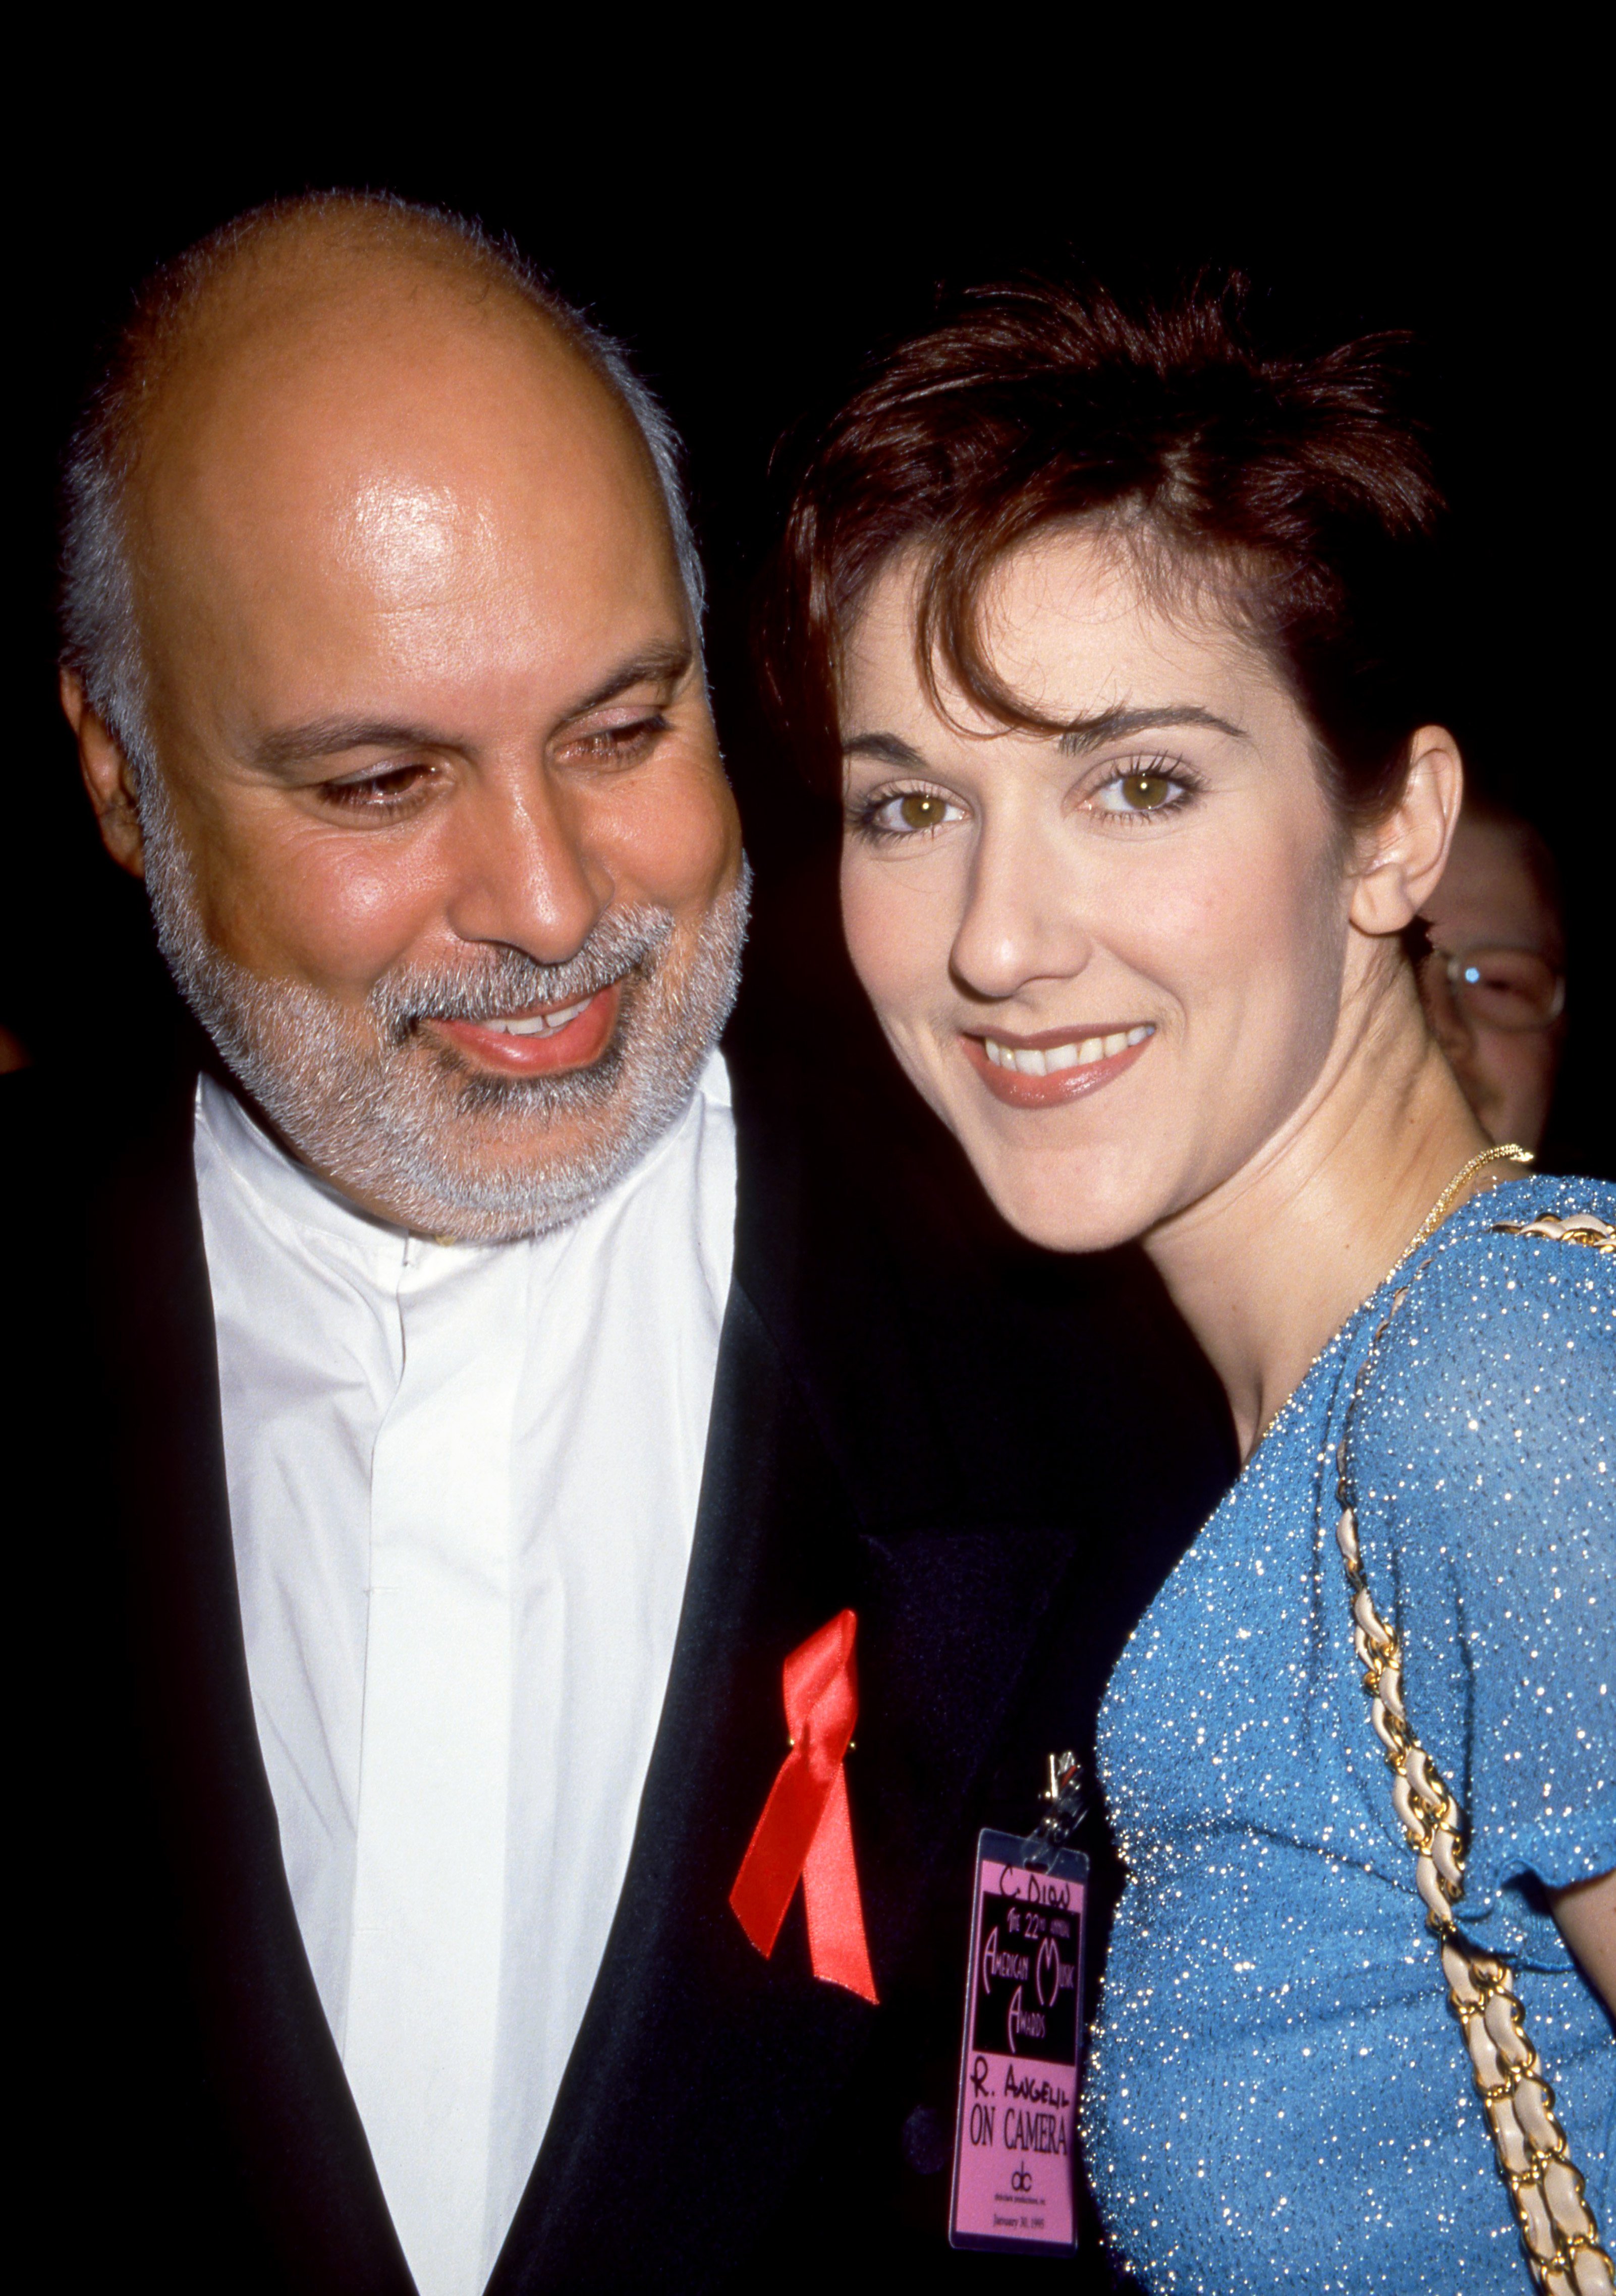 Singer Celine Dion and her husband Rene Angelil  during The 22nd Annual American Music Awards on January 30, 1995 at the Shrine Auditorium in Los Angeles, California.  | Source: Getty Images